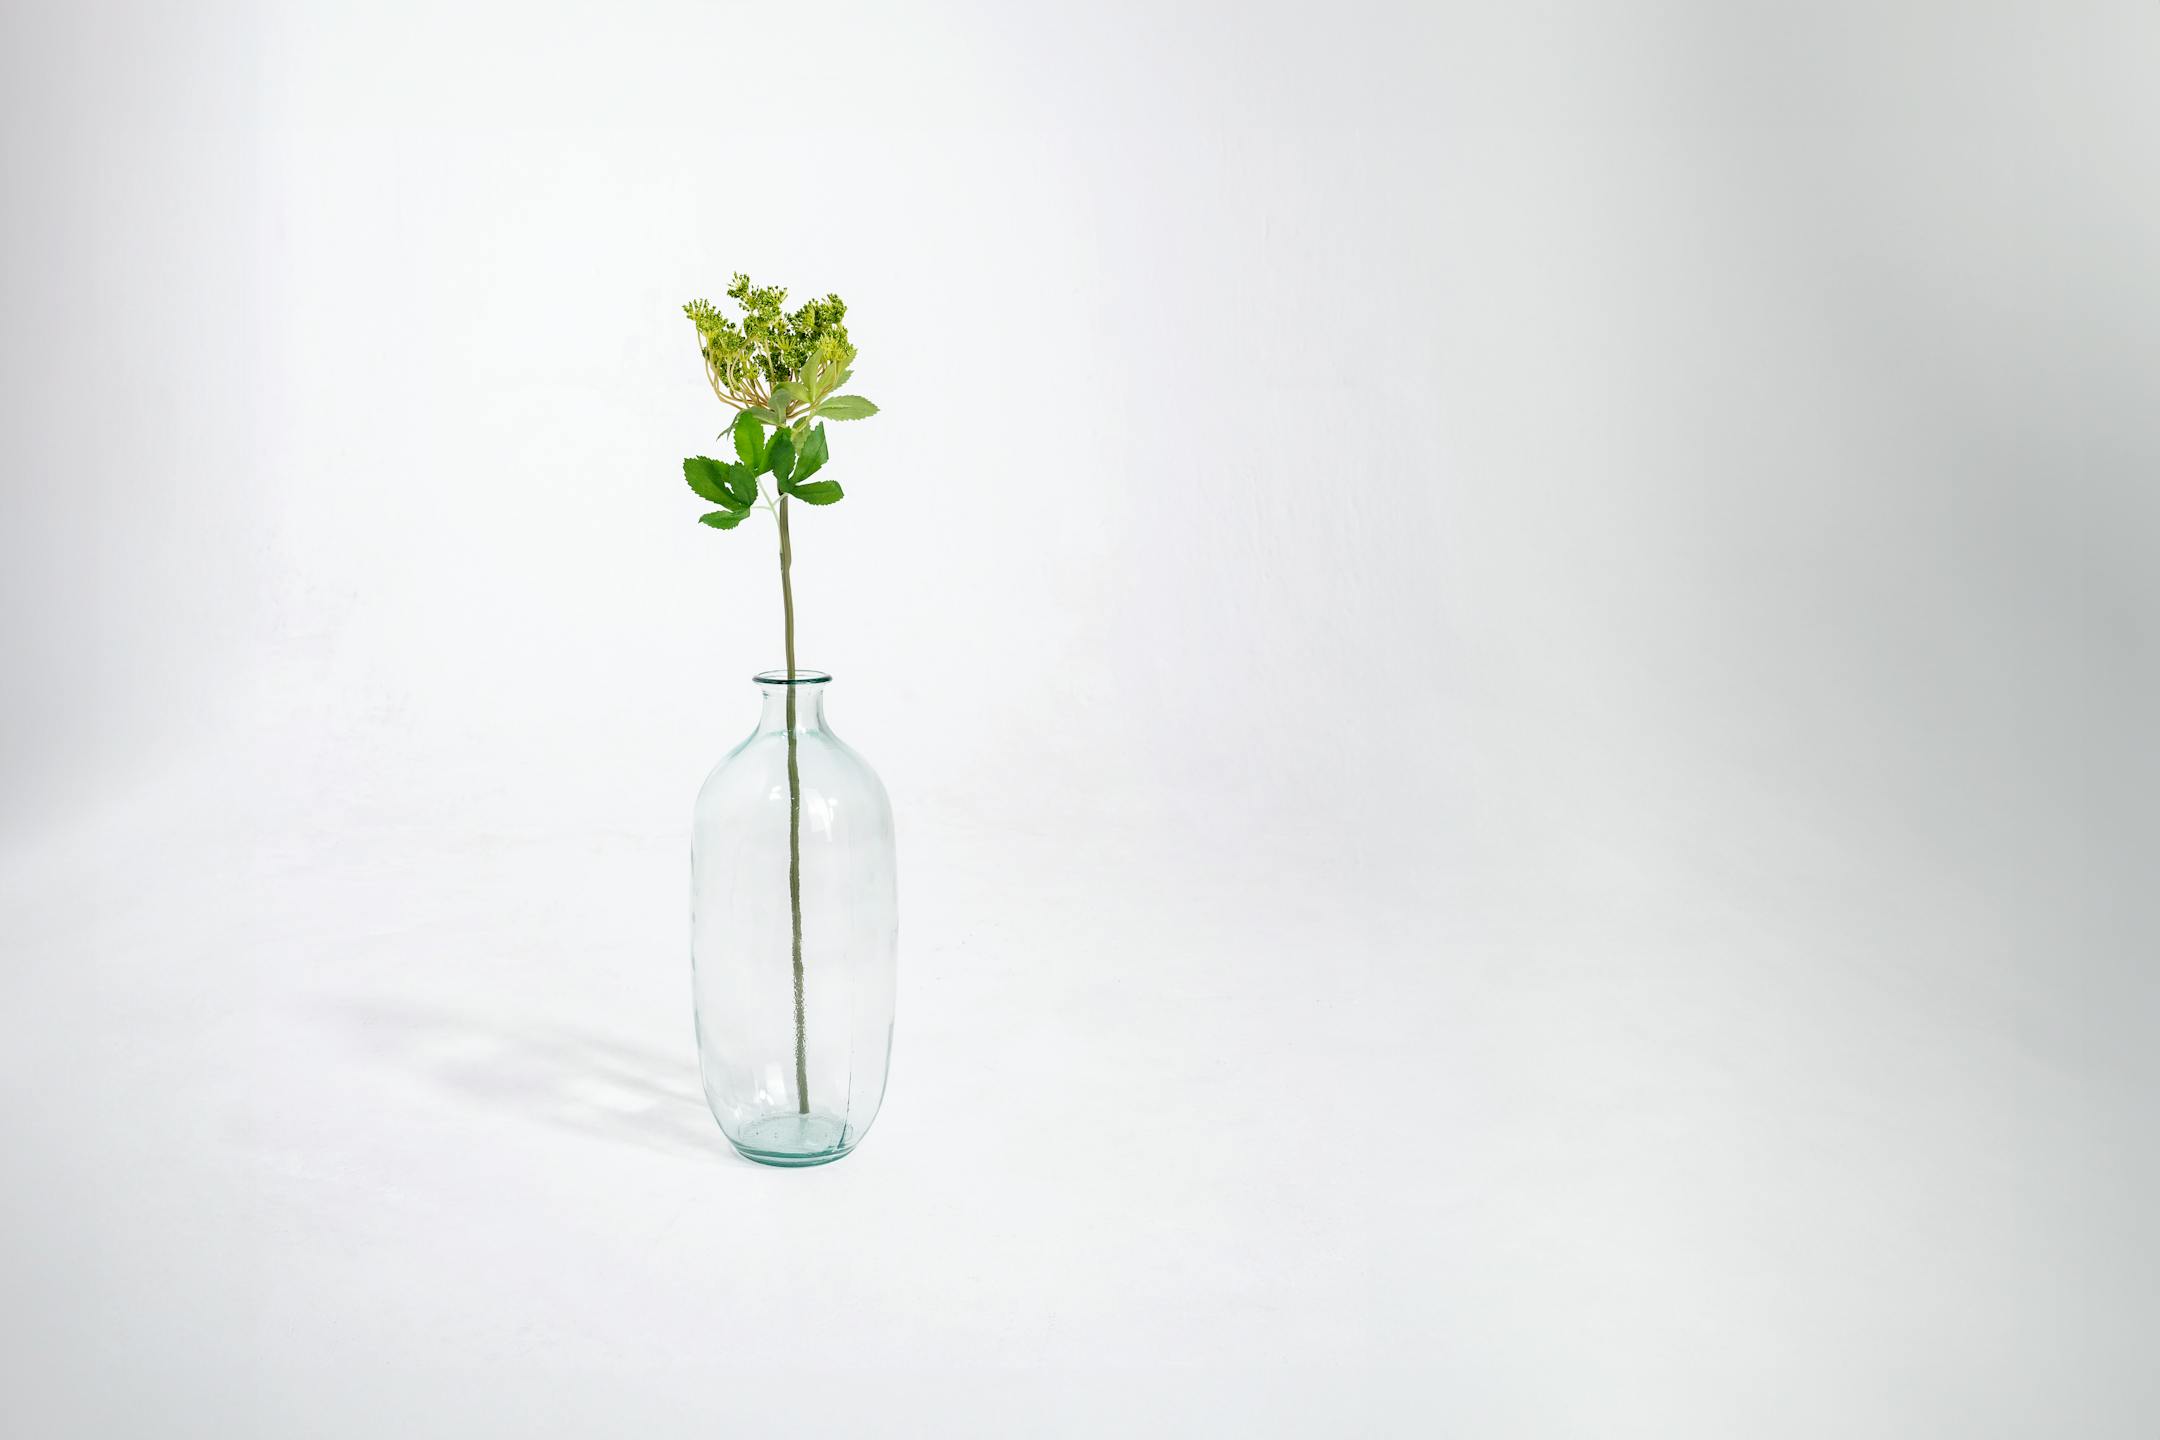 Green artificial cow parsley stem in glass vase